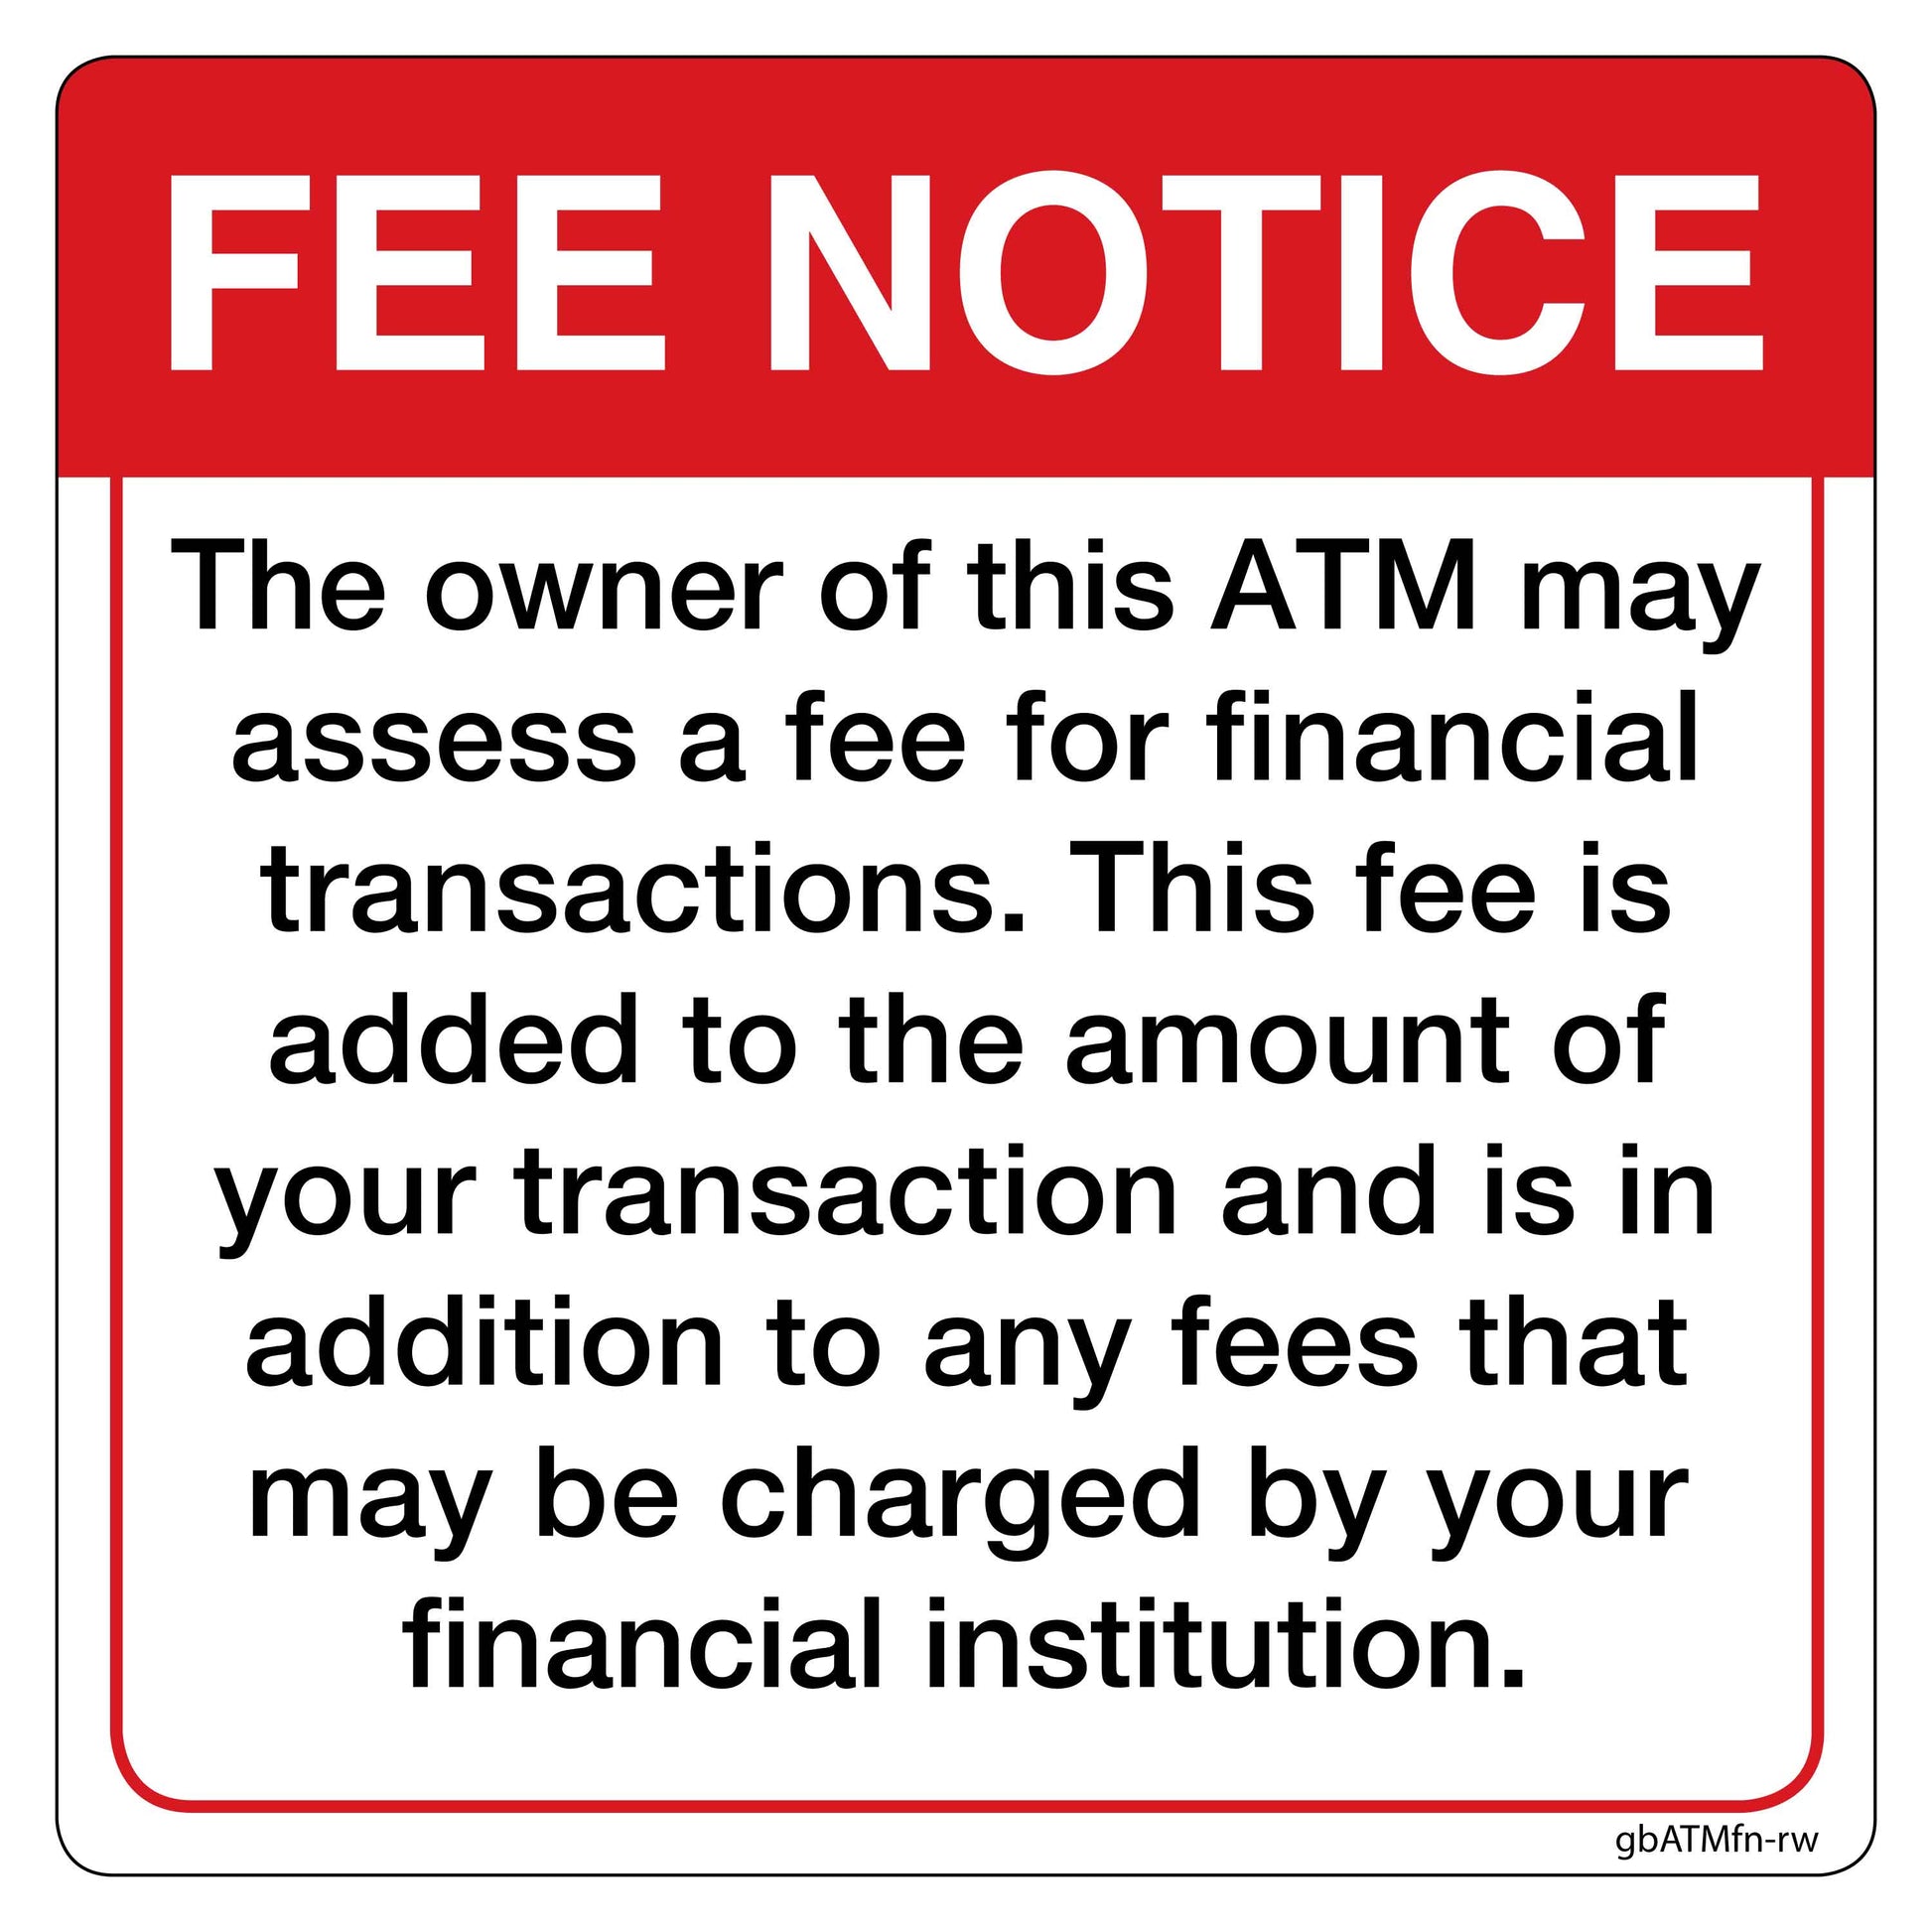 Fee Notice Decal, White with Red Outline - 4 inches by 4 inches in size. 